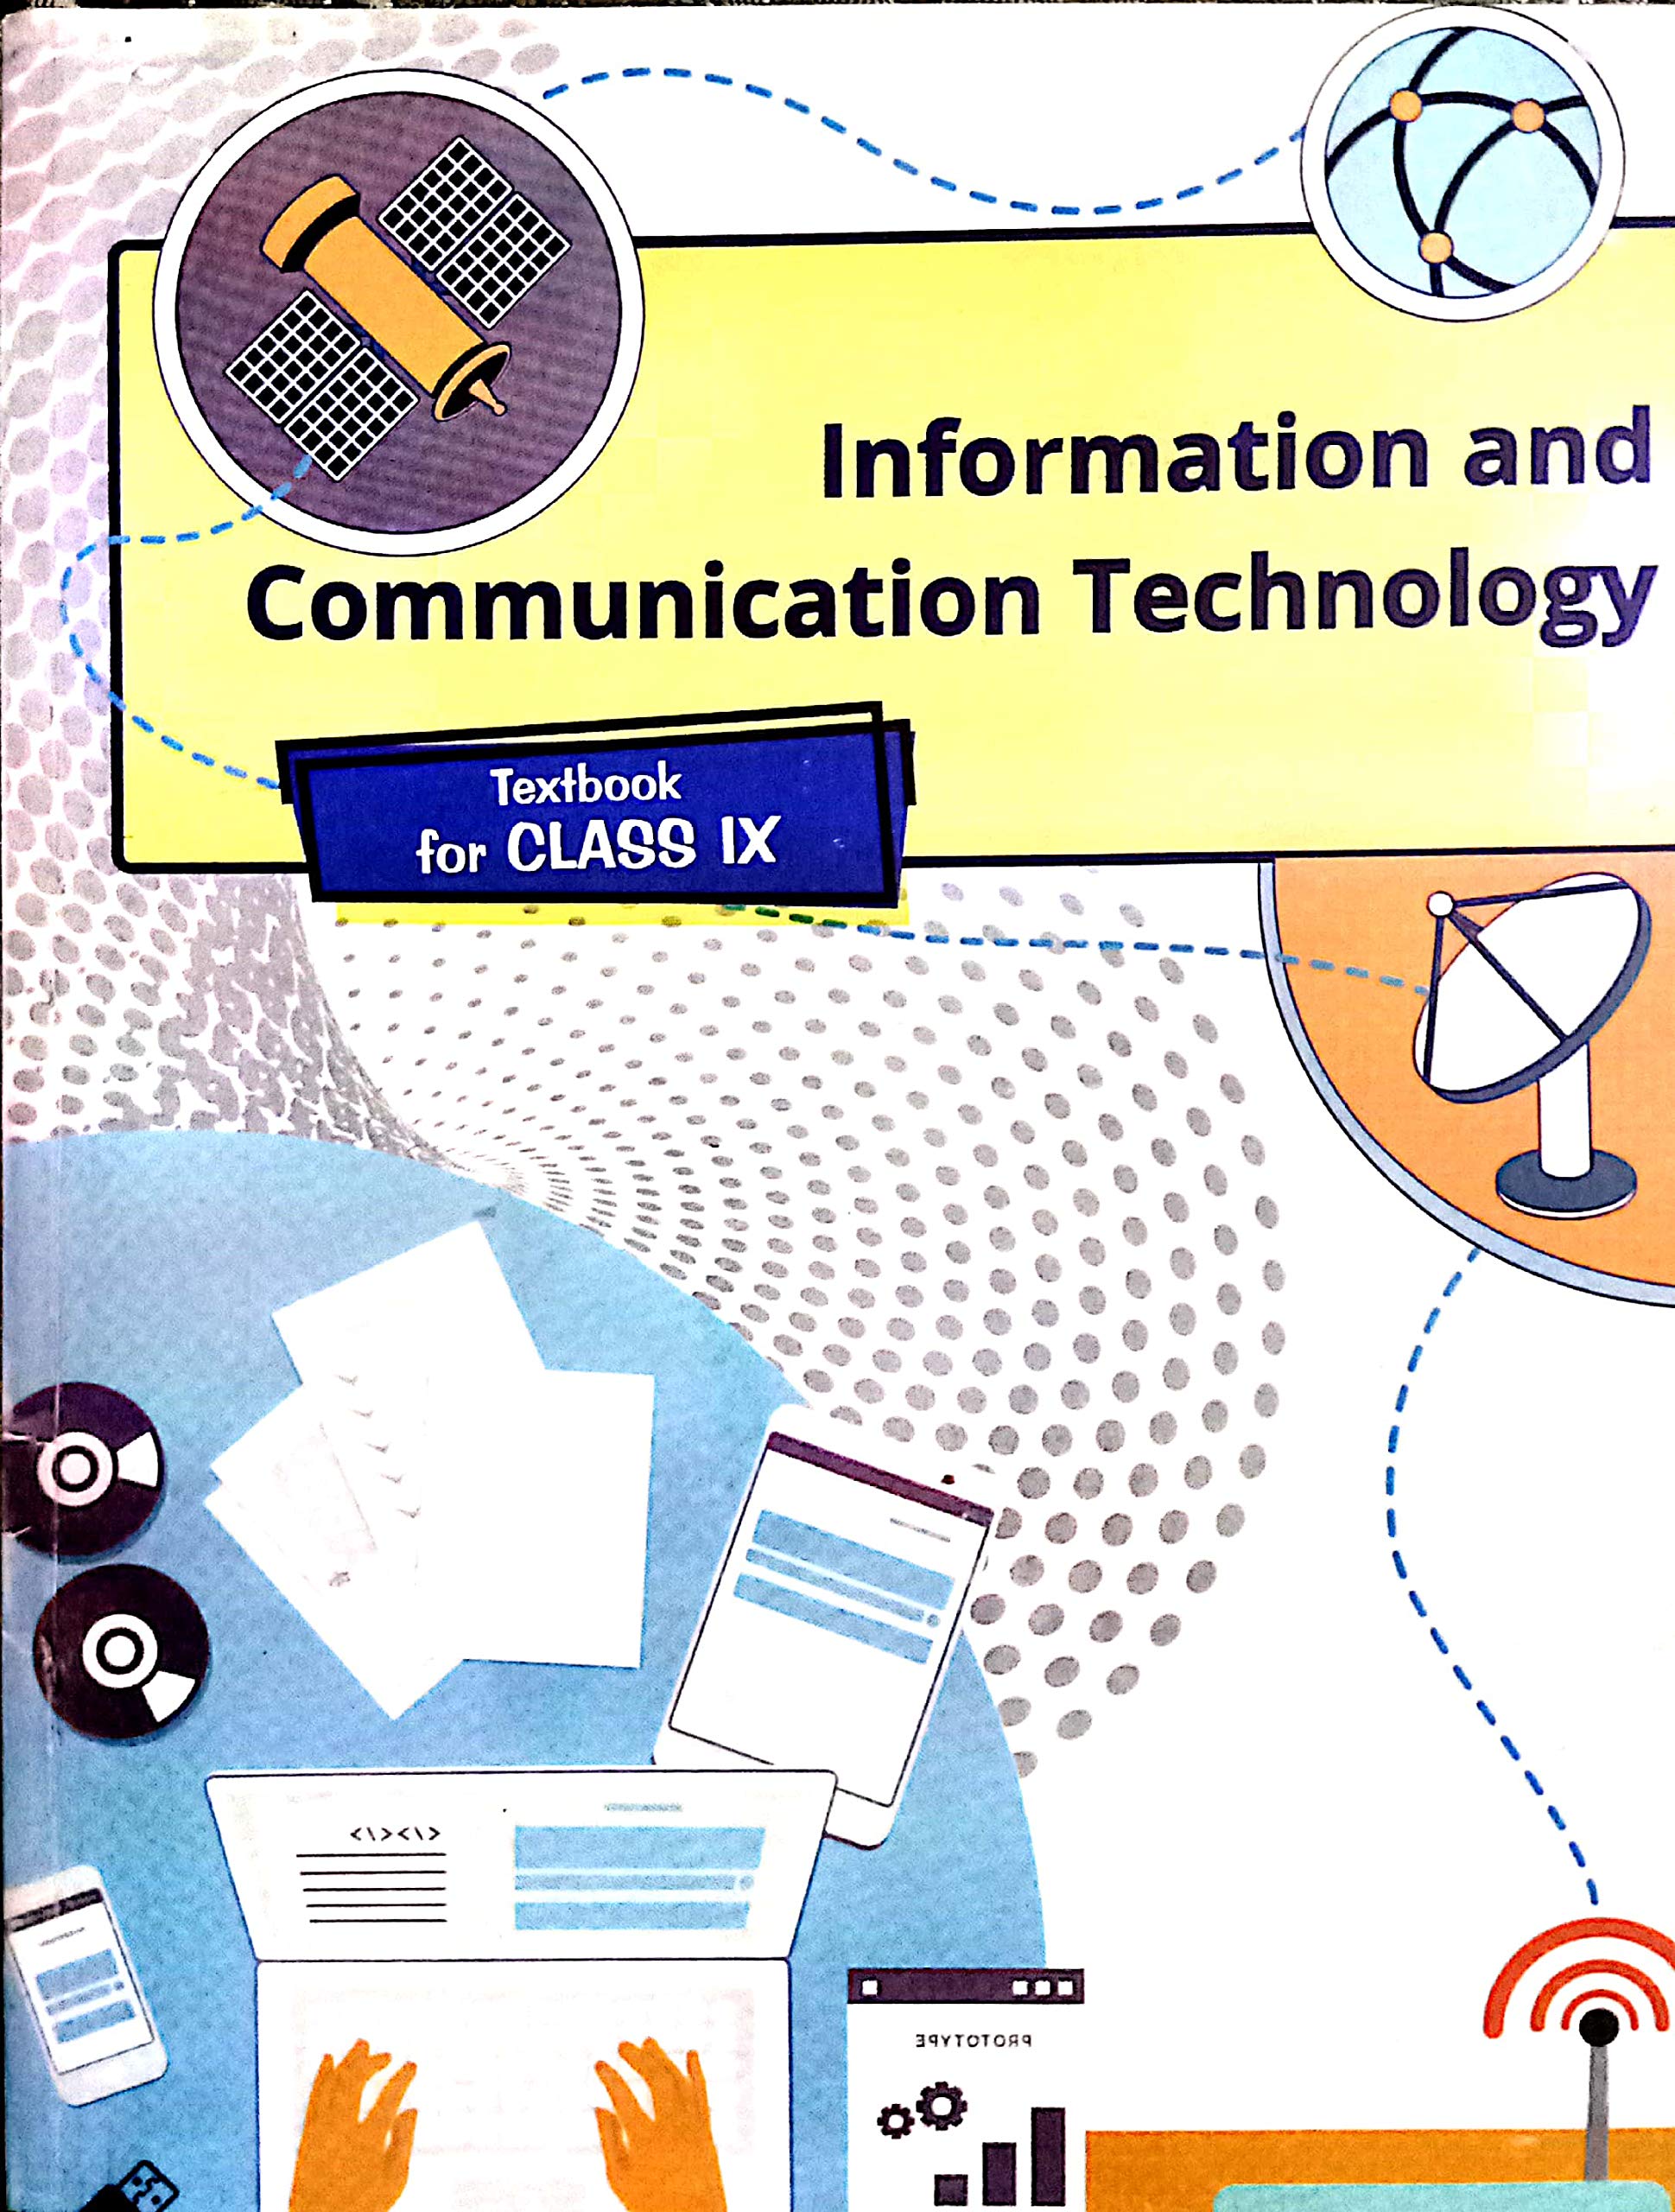 NCERT Textbook for class 9th